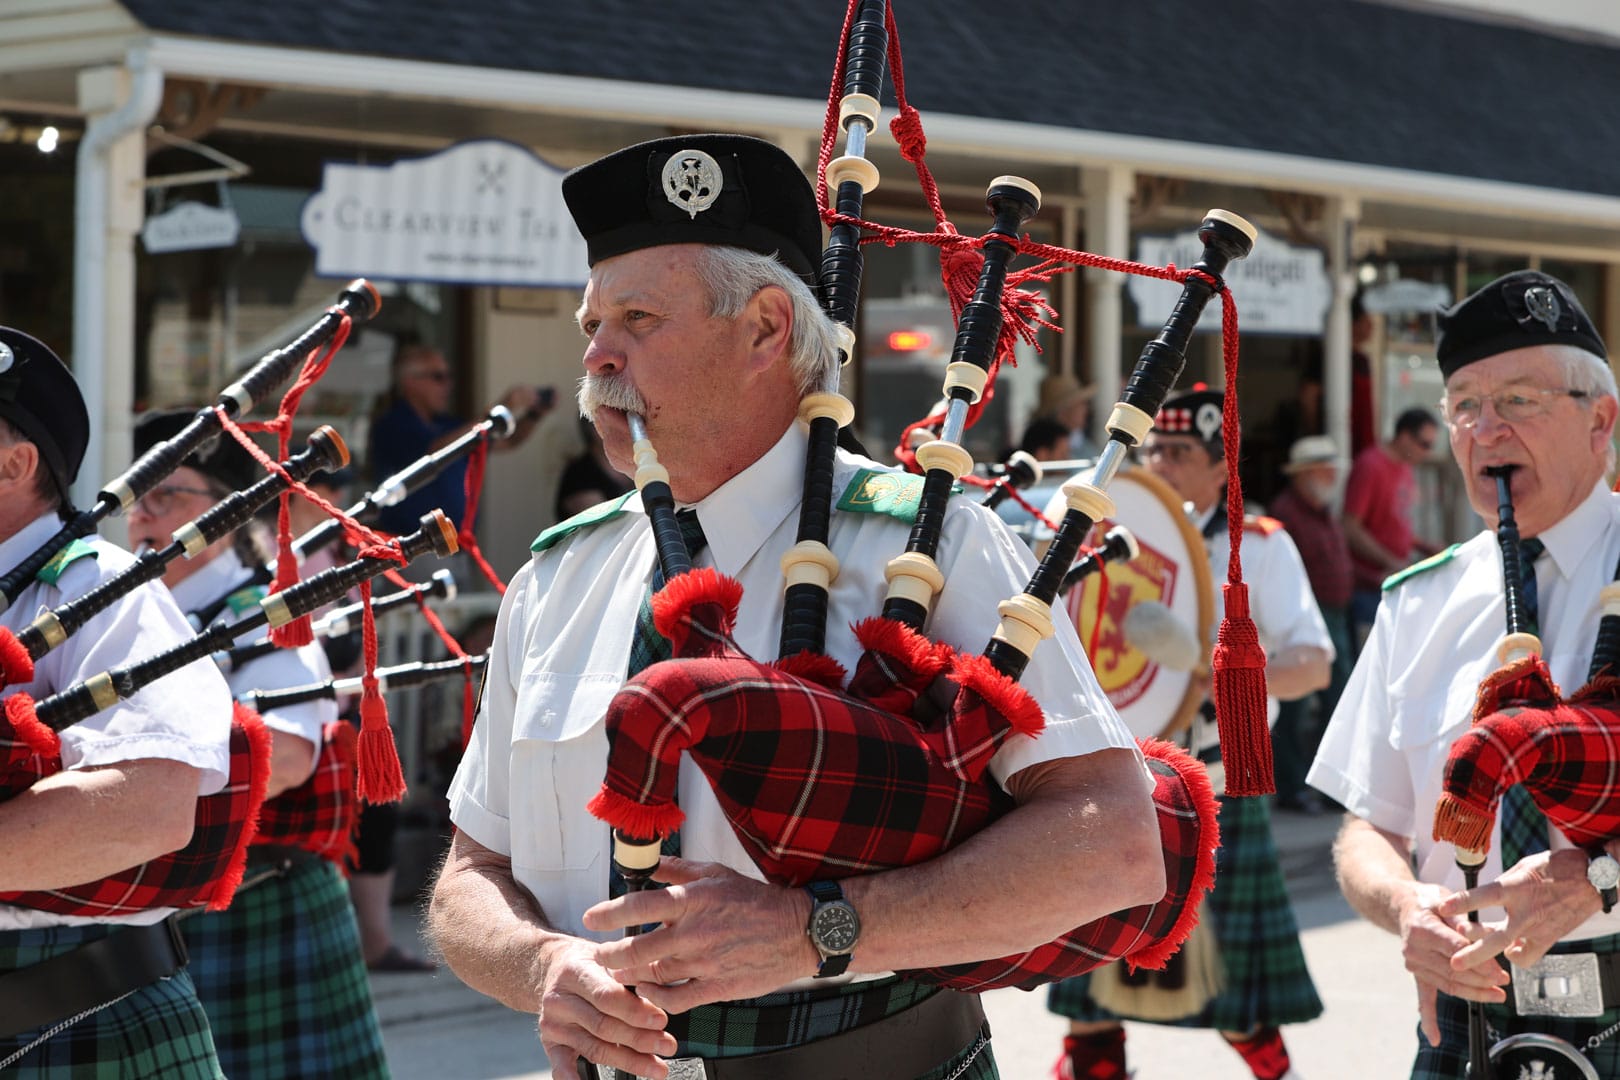 Pipe and drum band at Schomberg Fair Annual Parade